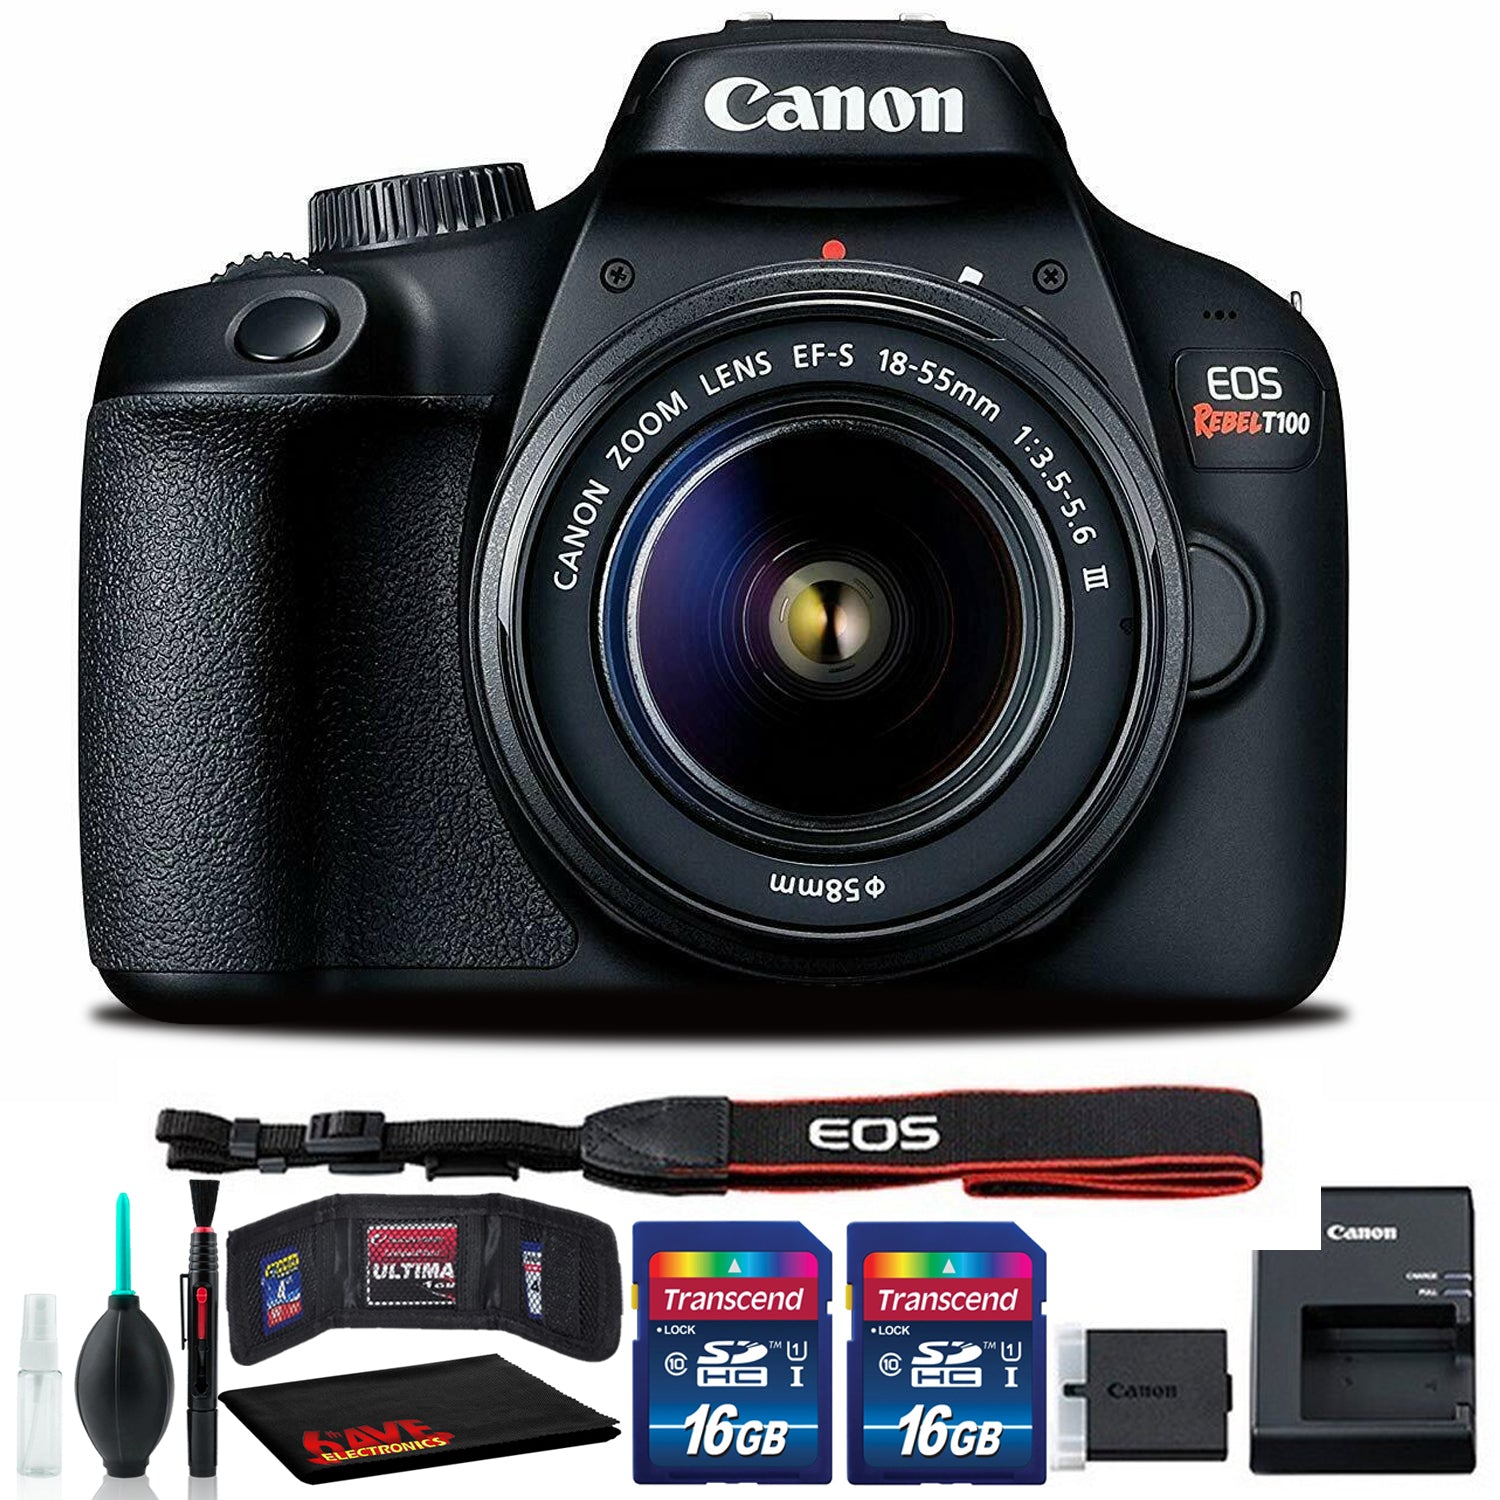 Canon EOS Rebel T100 DSLR Camera with 18-55mm III Lens (Intl Model) Includes Two 16GB Memory Cards and Cleaning Kit